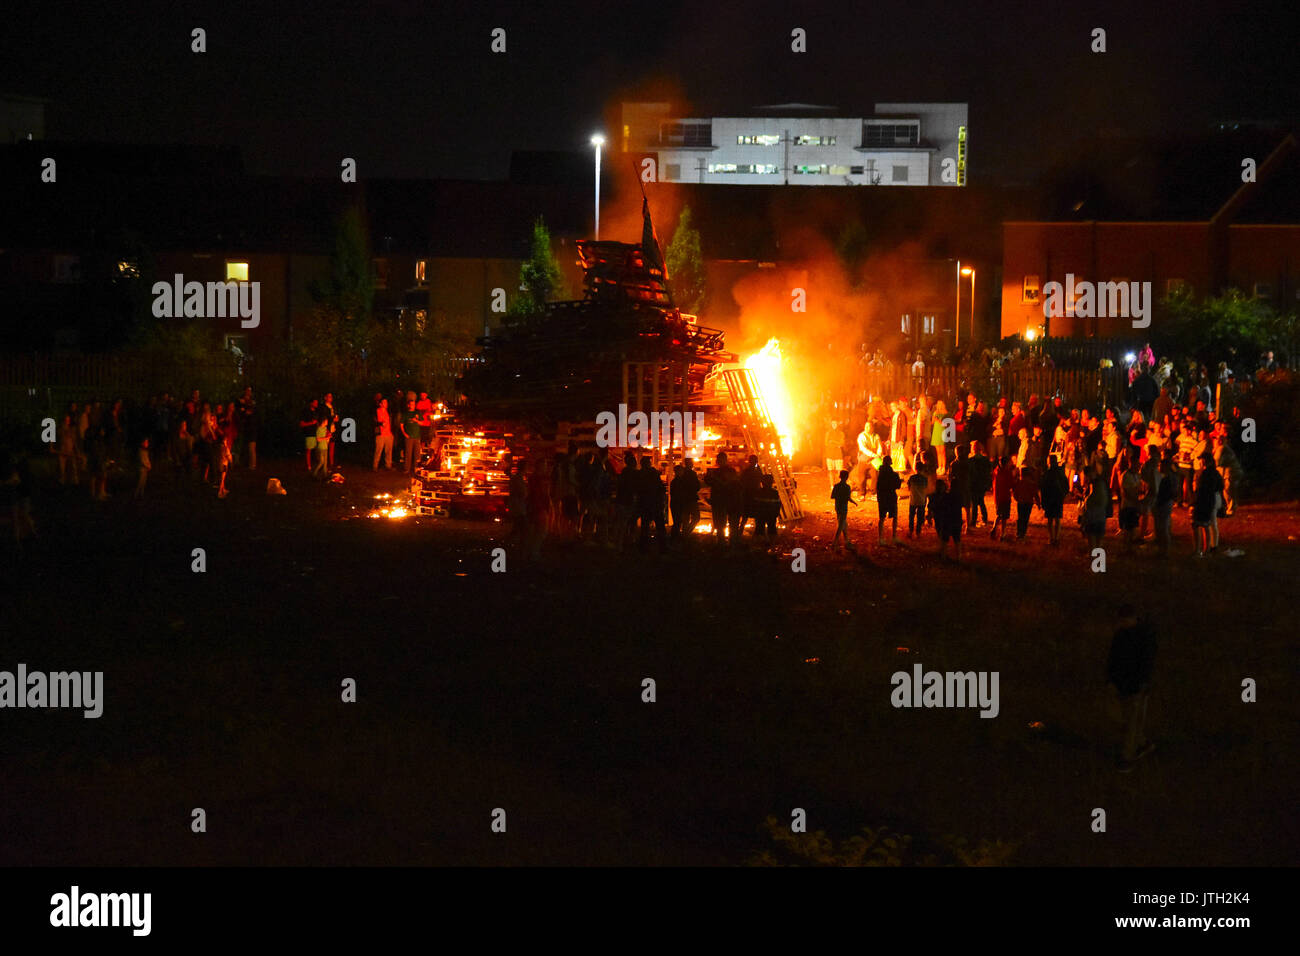 Belfast, Northern Ireland. 09th Aug, 2017. An Anti-Internment Bonfire at the Markets area of Belfast passed off peacefully after a day or rioting the previous day when the same bonfire had been removed. Belfast: UK: 09 AUG Credit: Mark Winter/Alamy Live News Credit: Mark Winter/Alamy Live News Stock Photo